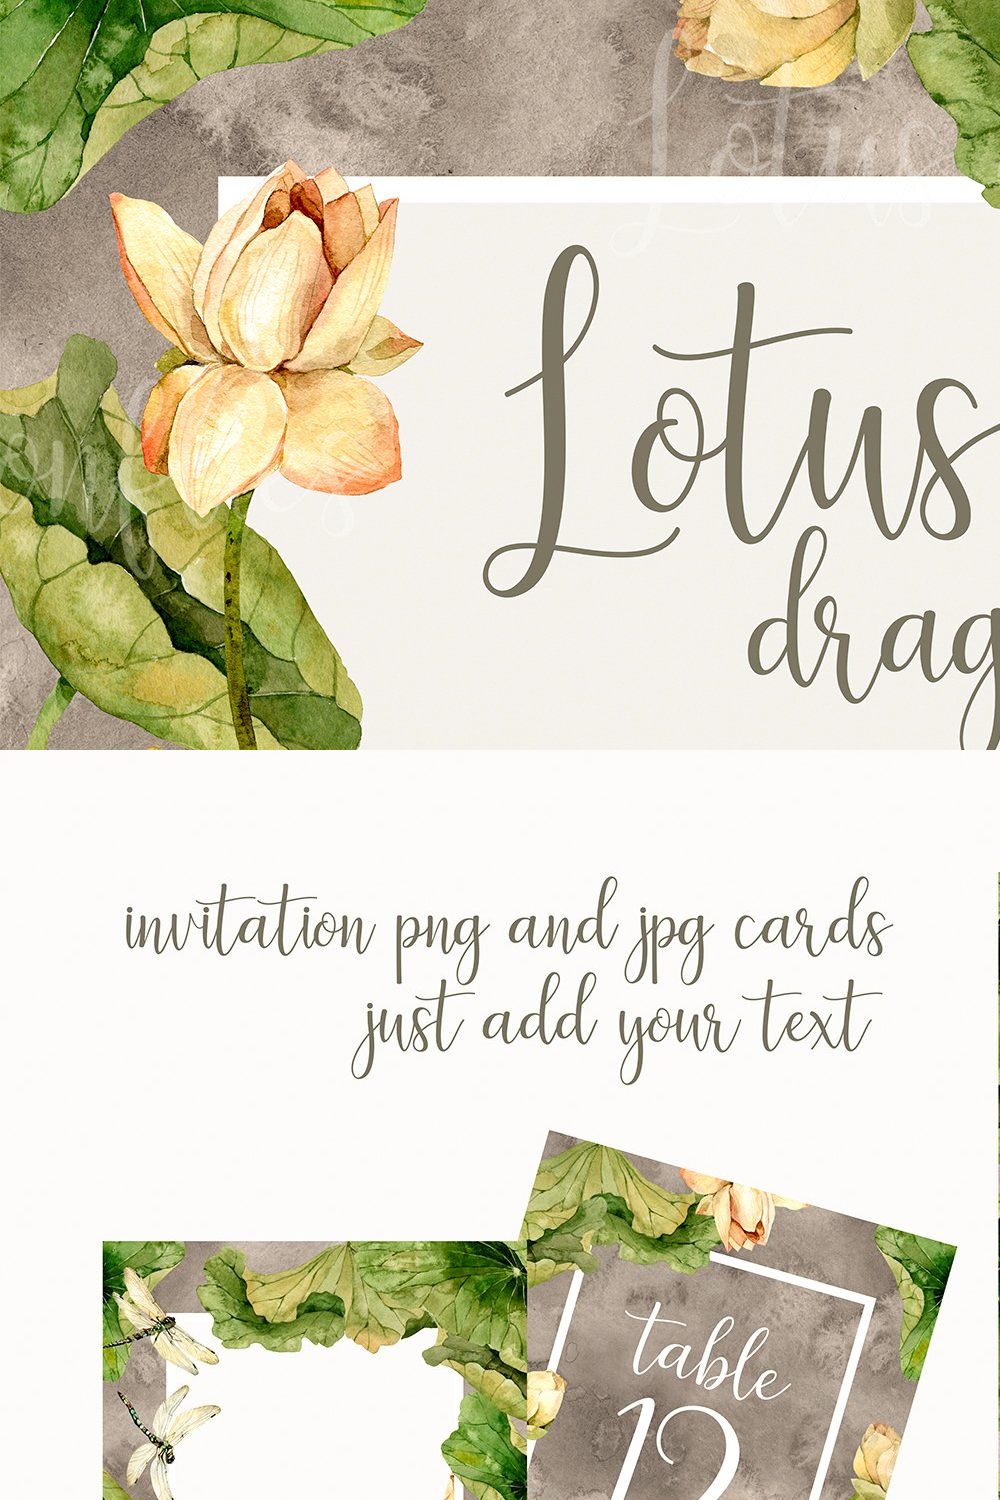 Waterlilies lotus and dragonfly set pinterest preview image.